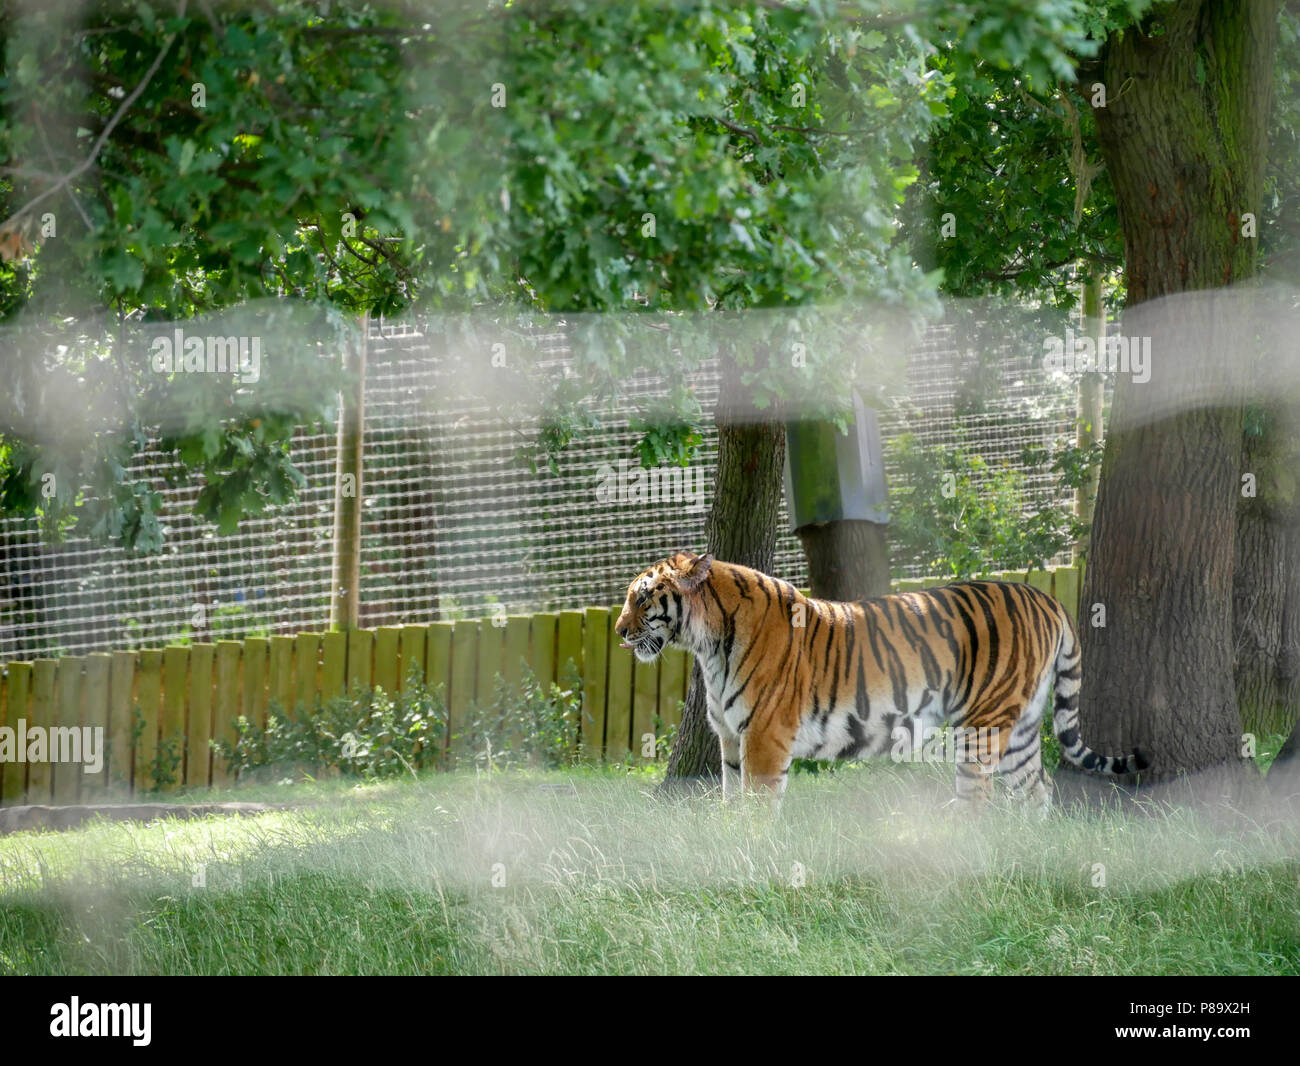 Yorkshire Wildlife Park in the UK on a summers day. Family attraction, zoo and wildlife park. Featuring animals that are in captivity but looked after. Stock Photo